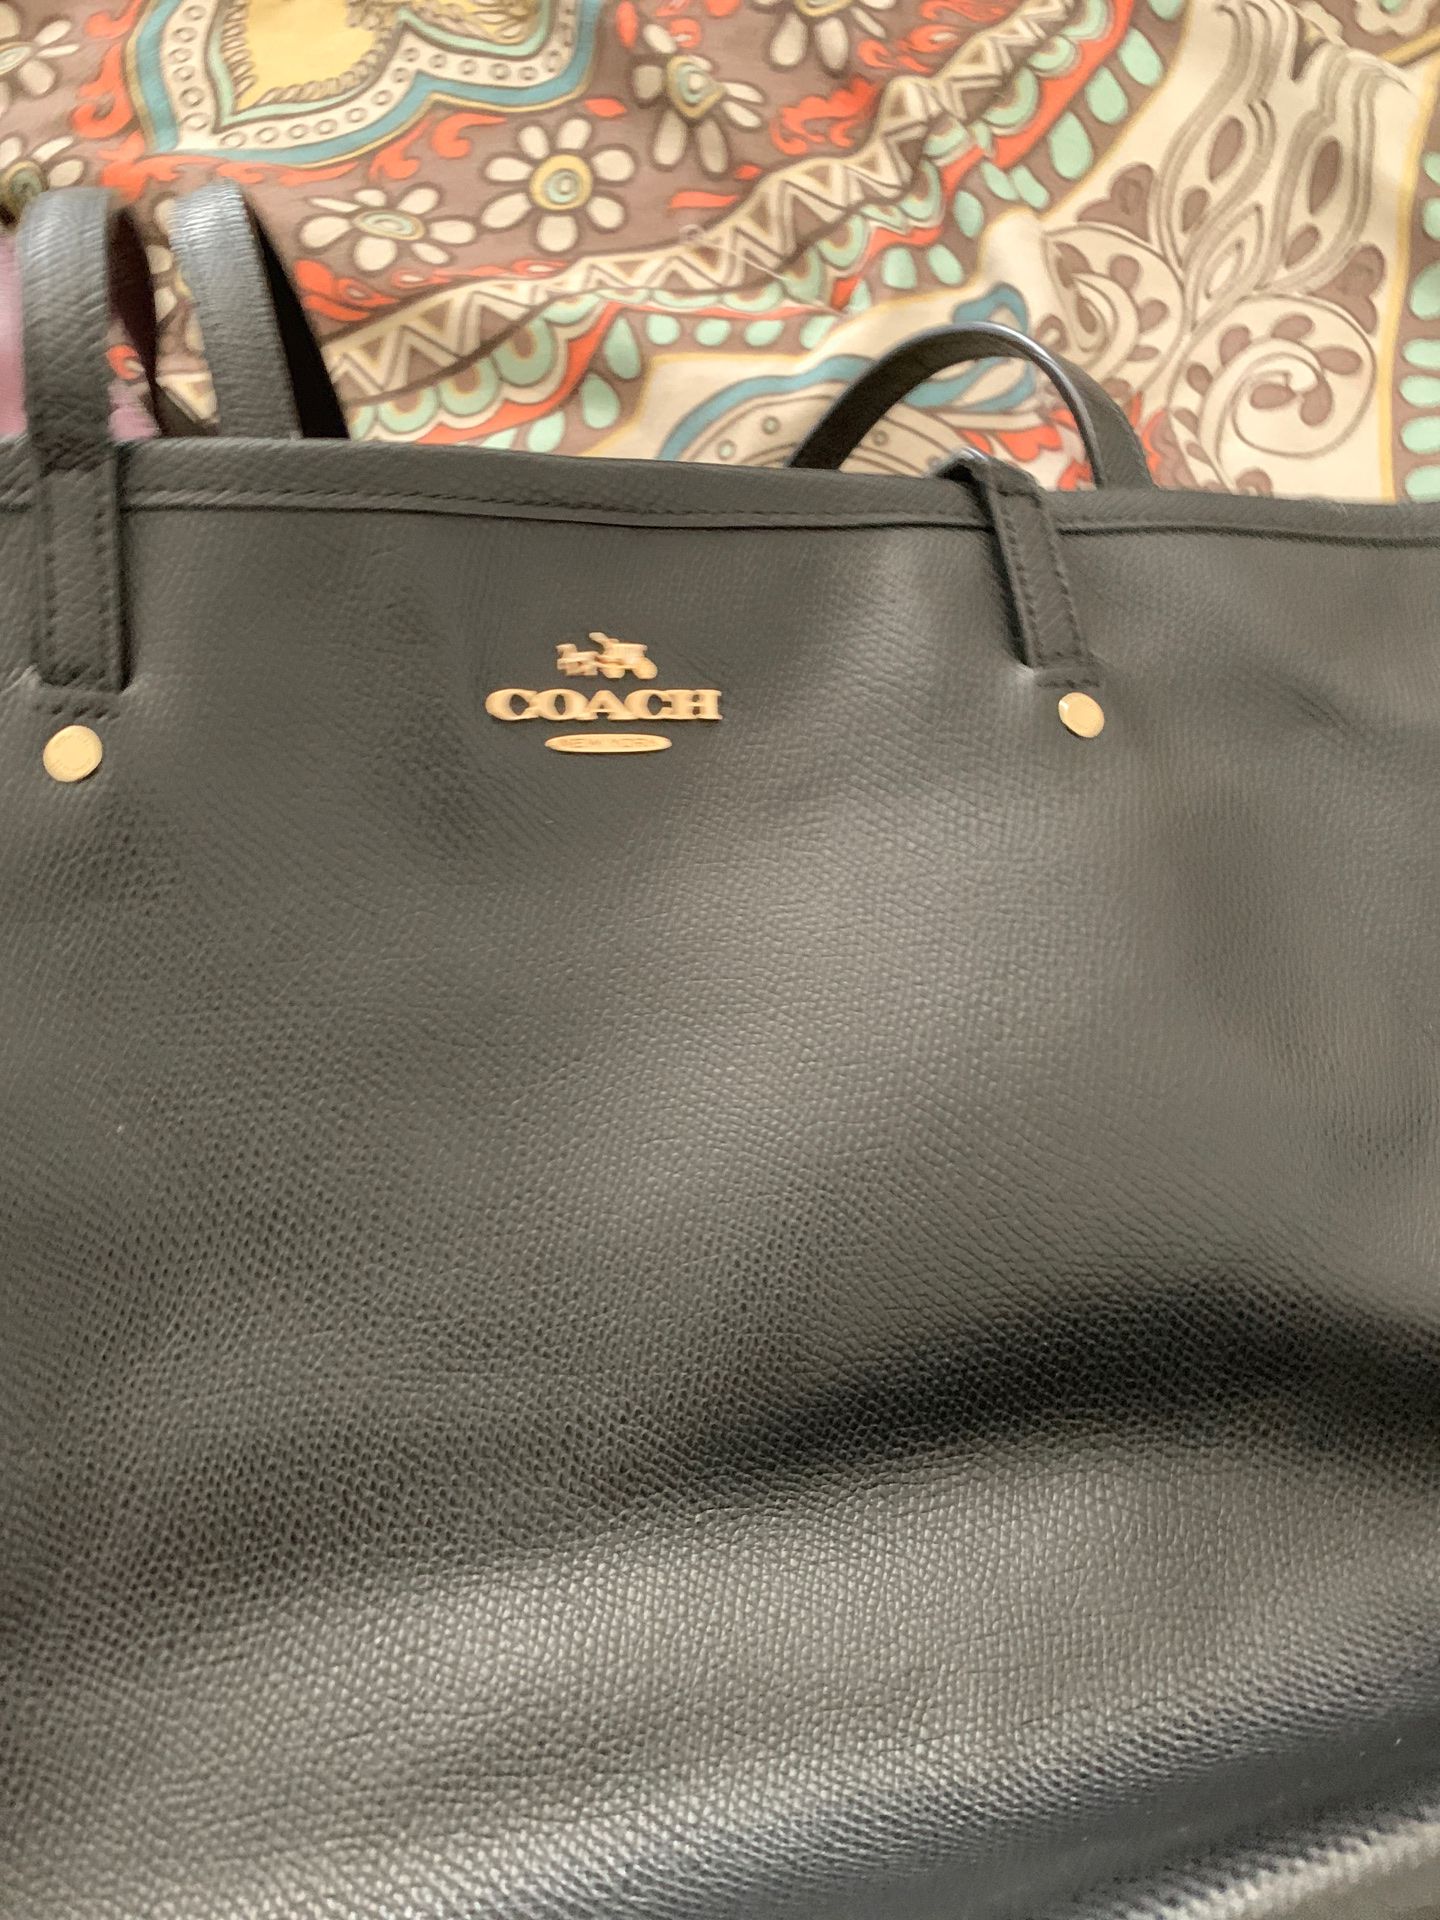 Coach purse brand new never used